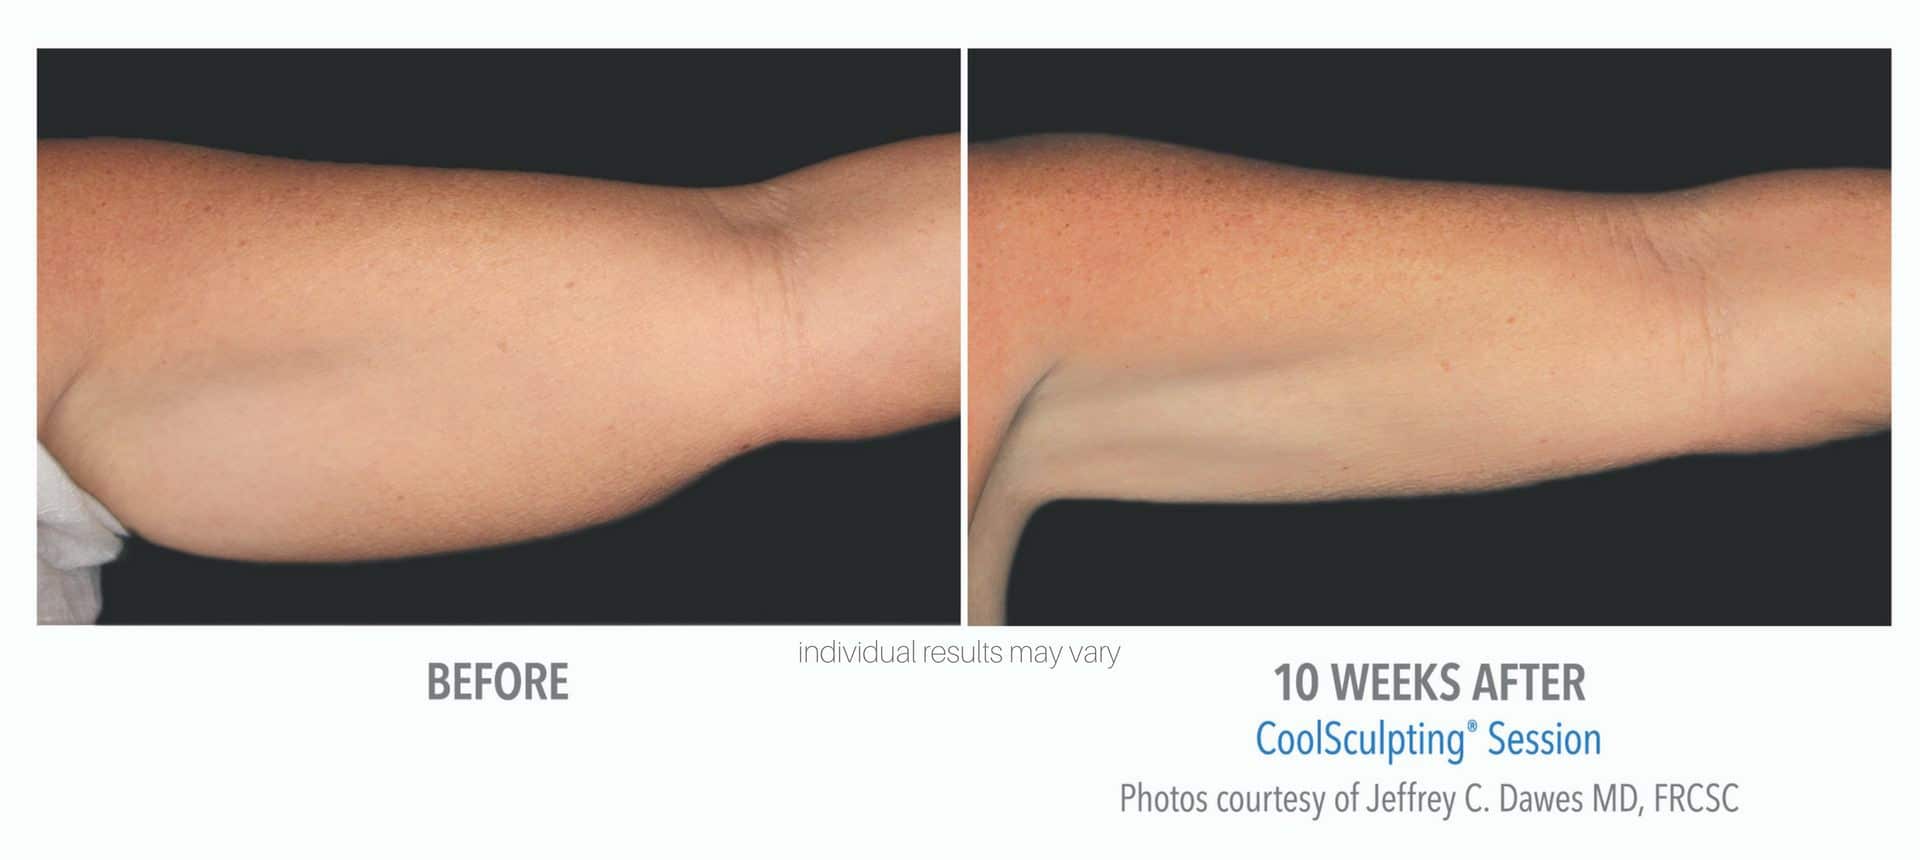 Woman's underarm before and after coolsculpting treatment.